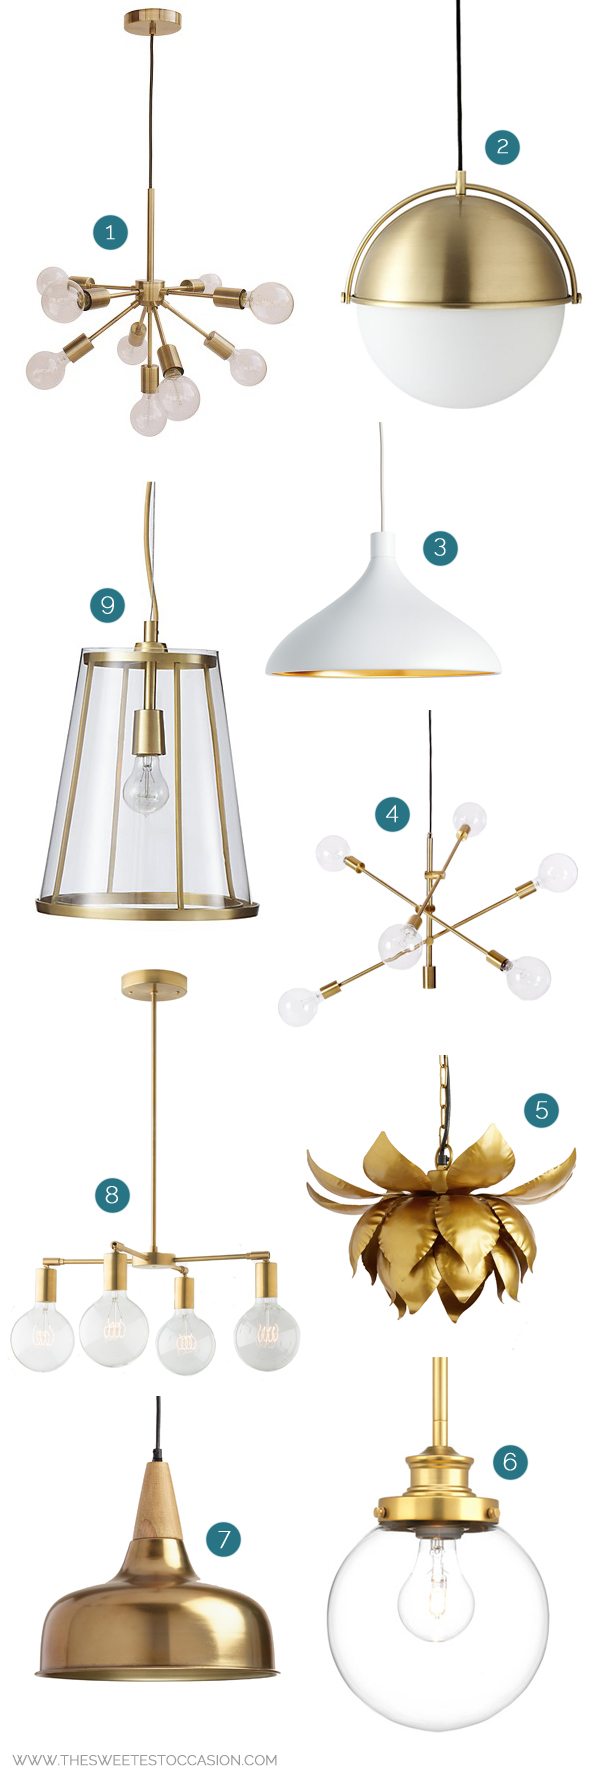 Budget Brass Light Fixtures Under $350 and other home improvement ideas and home decor inspiration from @cydconverse